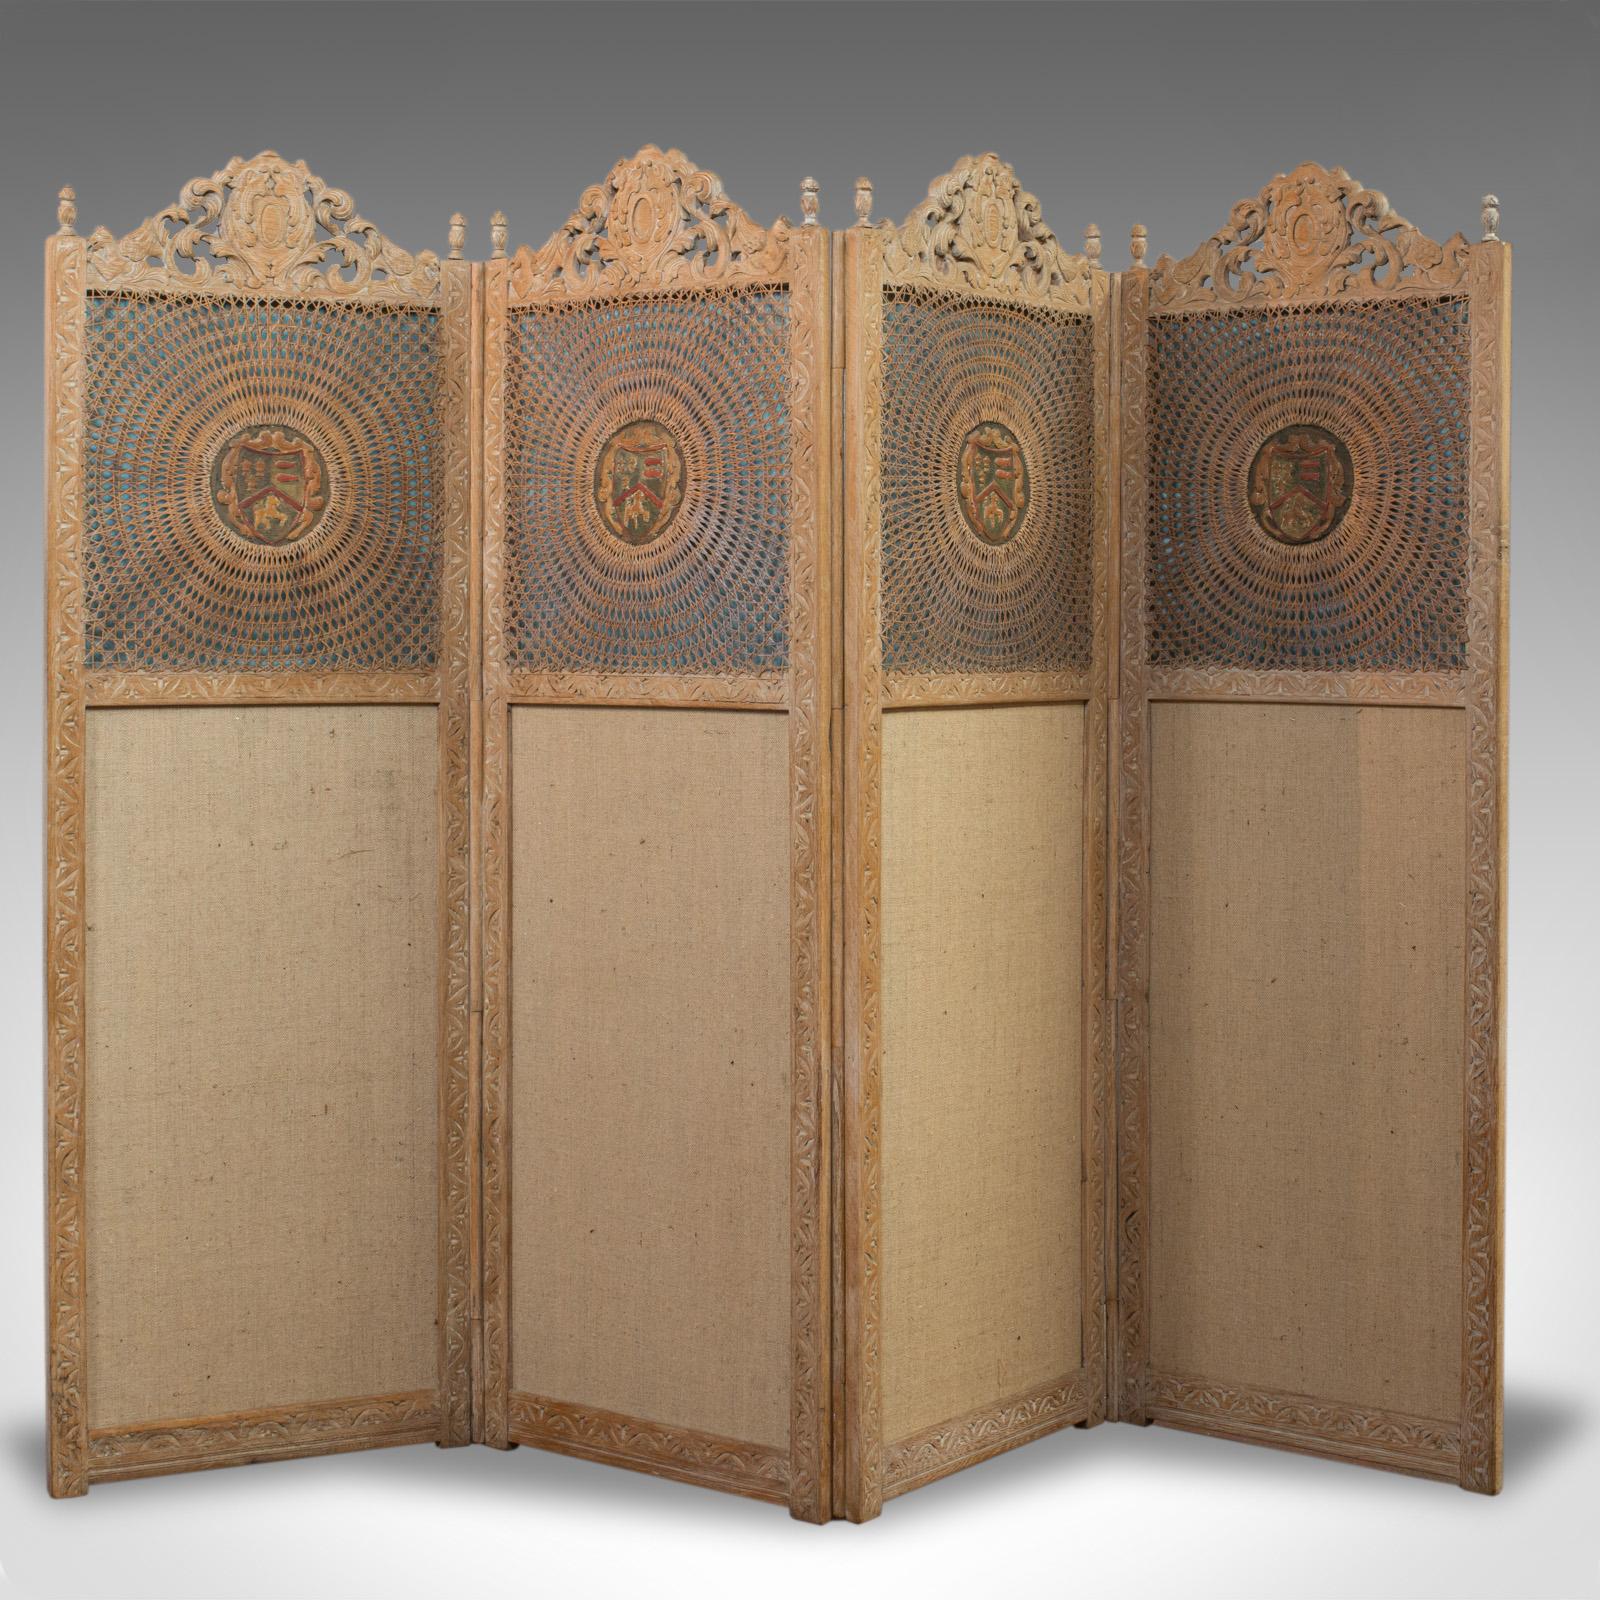 This is an antique Victorian screen. An English, limed oak and cane room divider or wall panel and dating to the late 19th century, circa 1890.

Pleasingly weighted, versatile screen
Displays a desirable aged patina
Limed oak showing distinctive